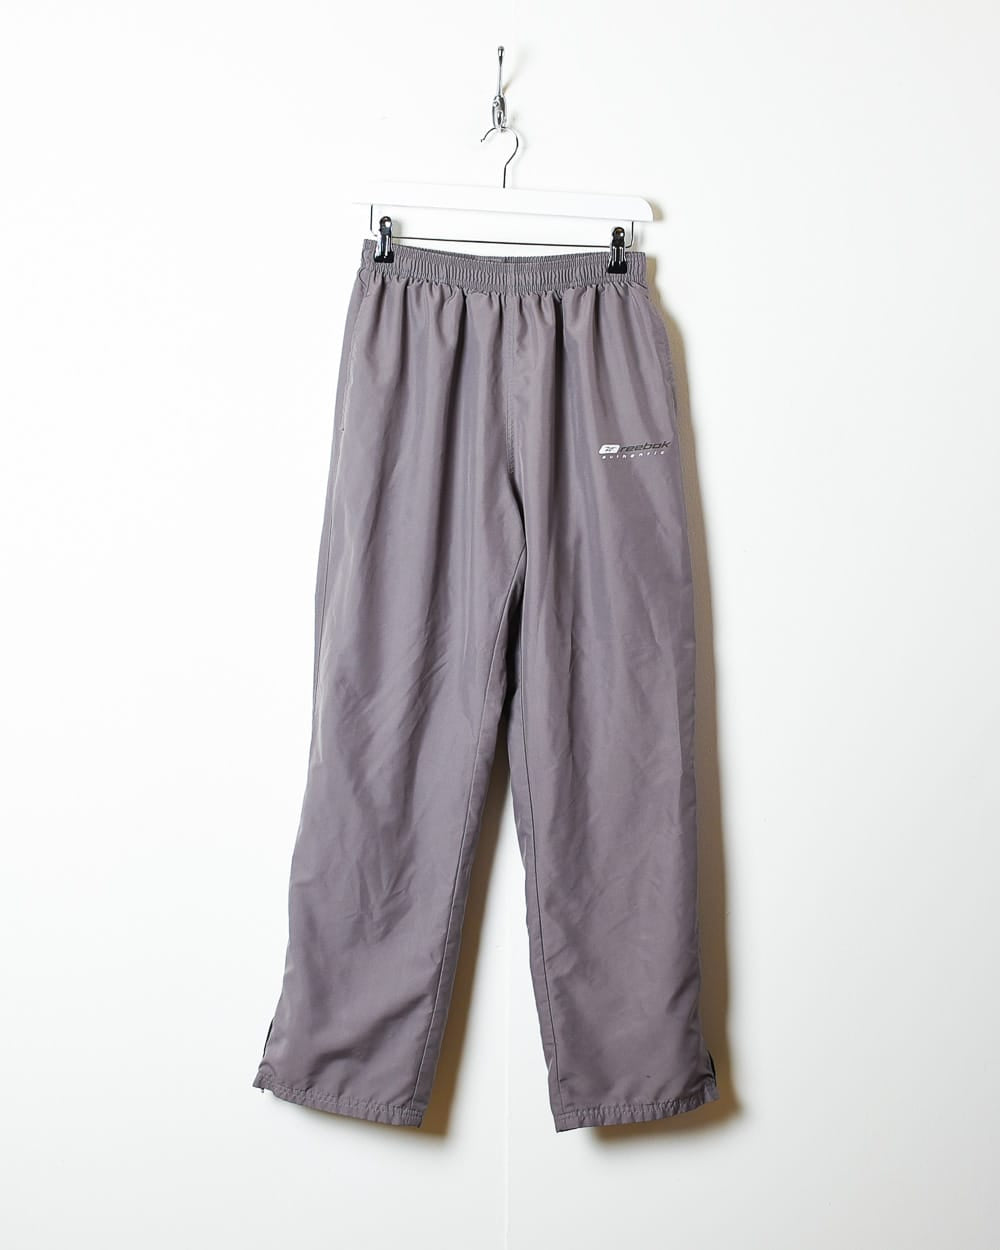 Grey Reebok Authentic Tracksuit Bottoms - Small